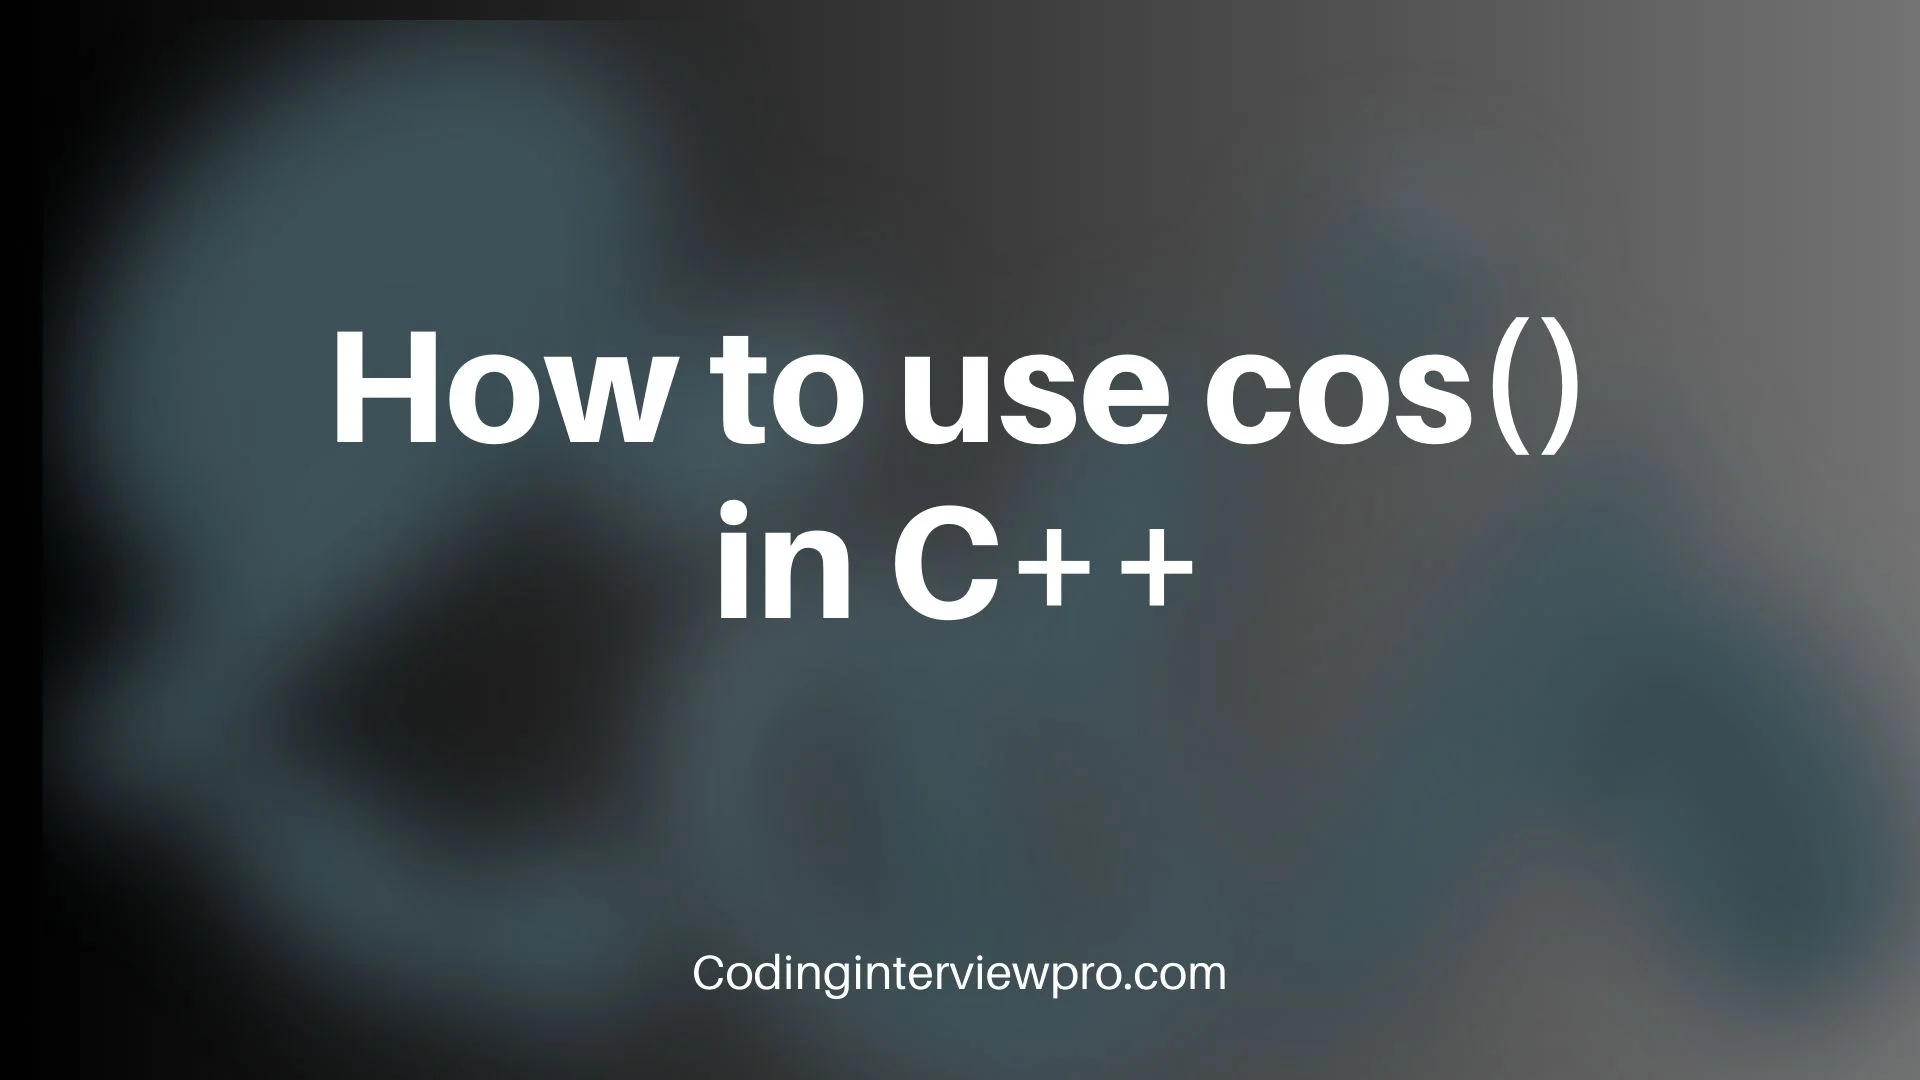 How To Use Cos() In Cpp